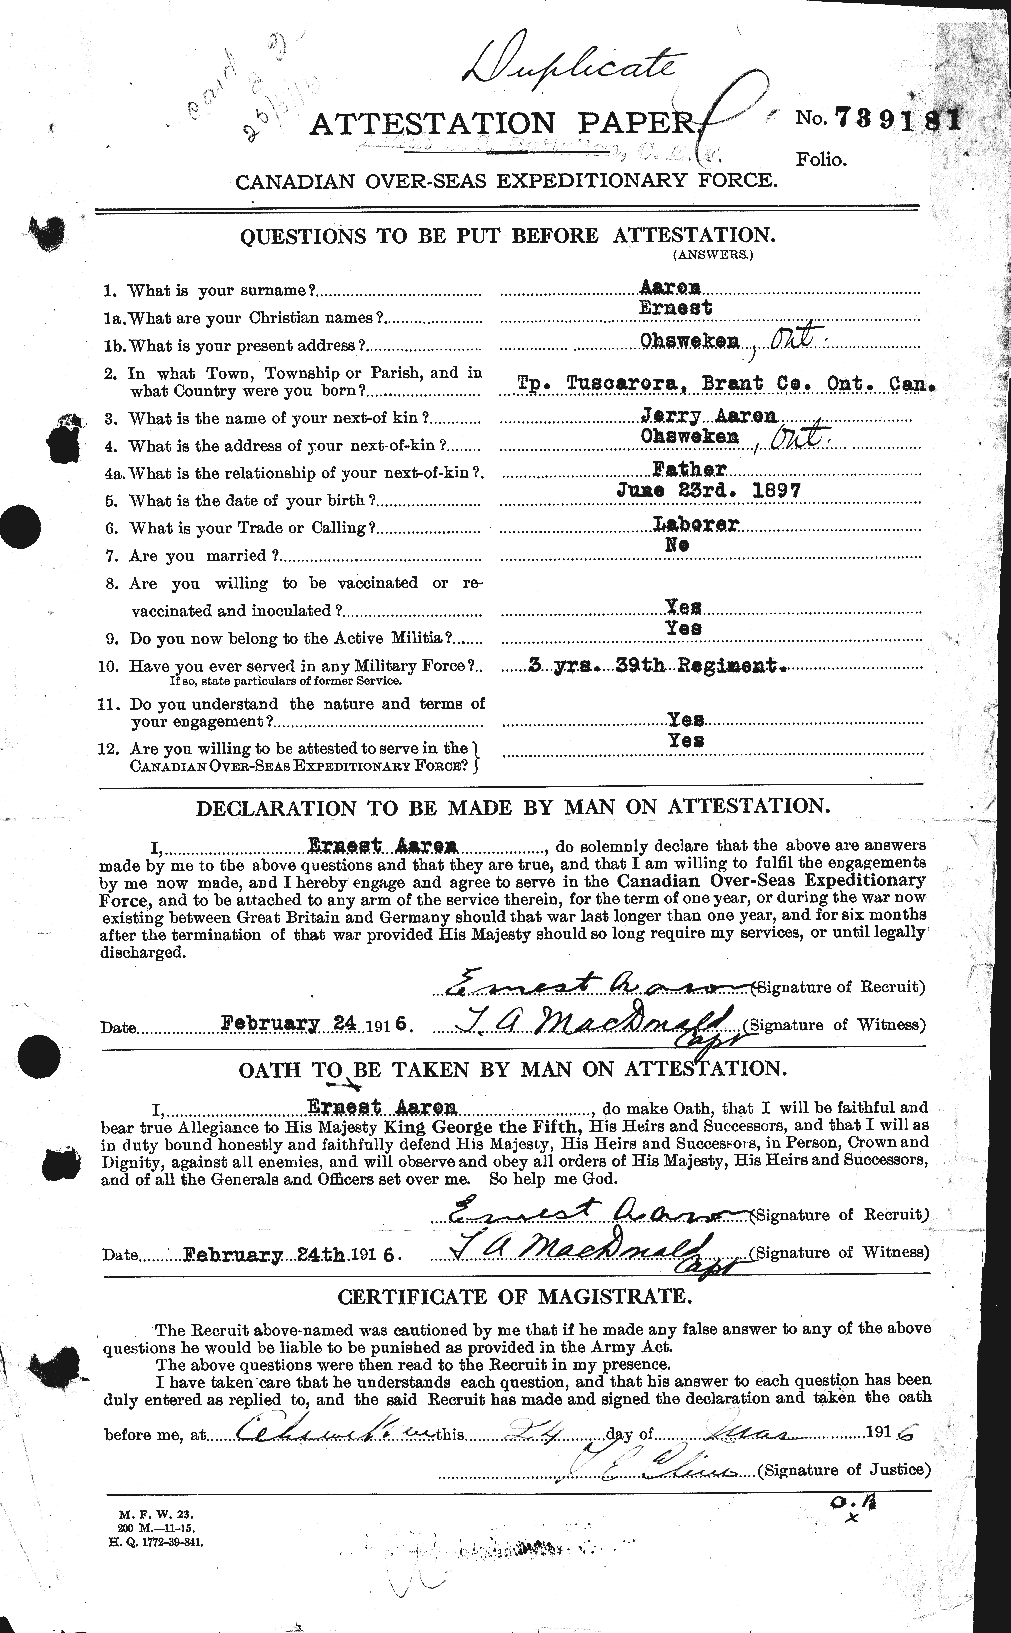 Personnel Records of the First World War - CEF 200739a